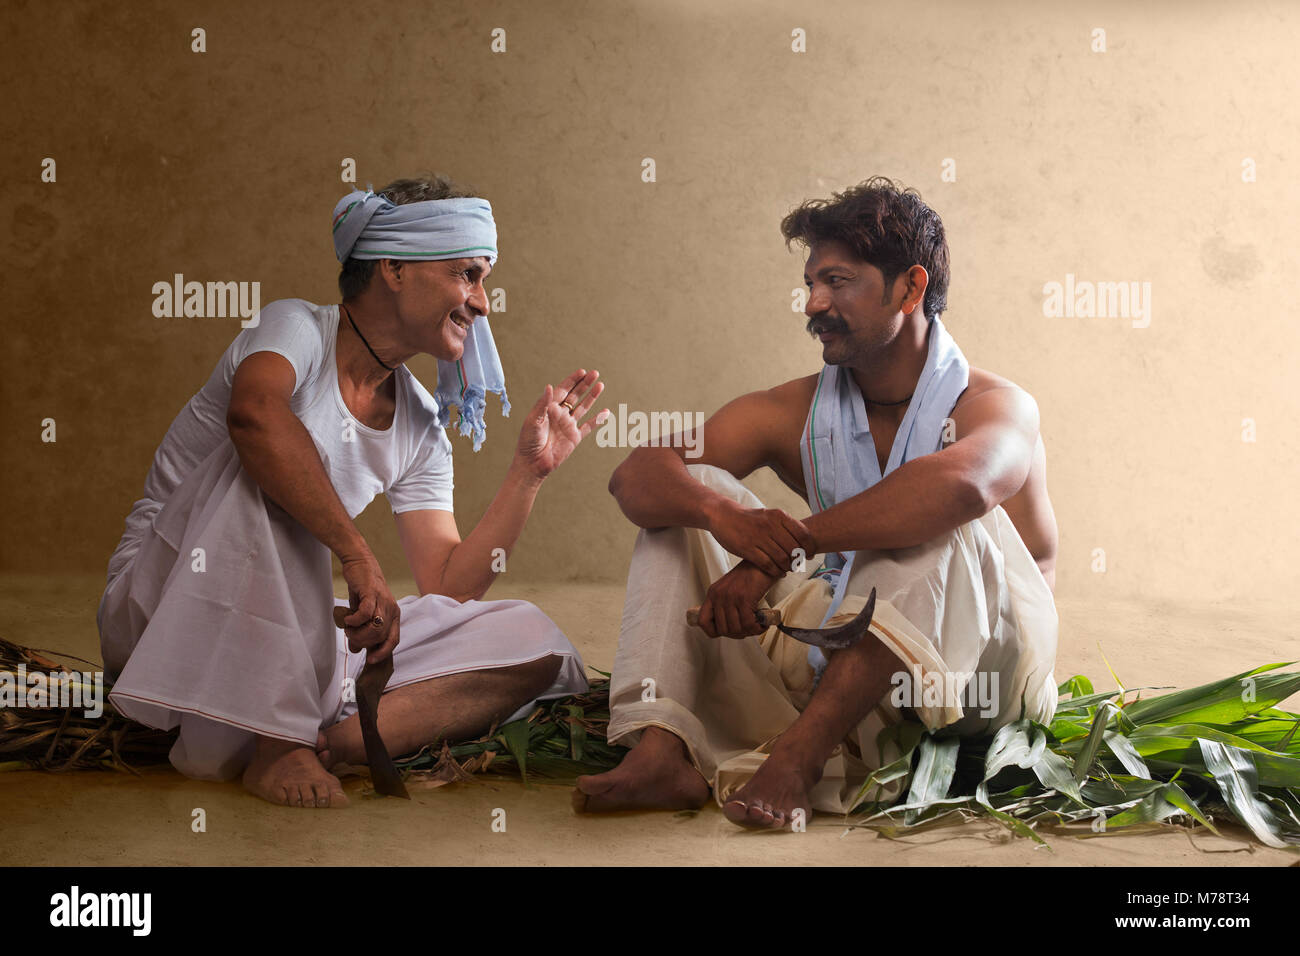 Two Indian farmer holding farming tools and talking Stock Photo